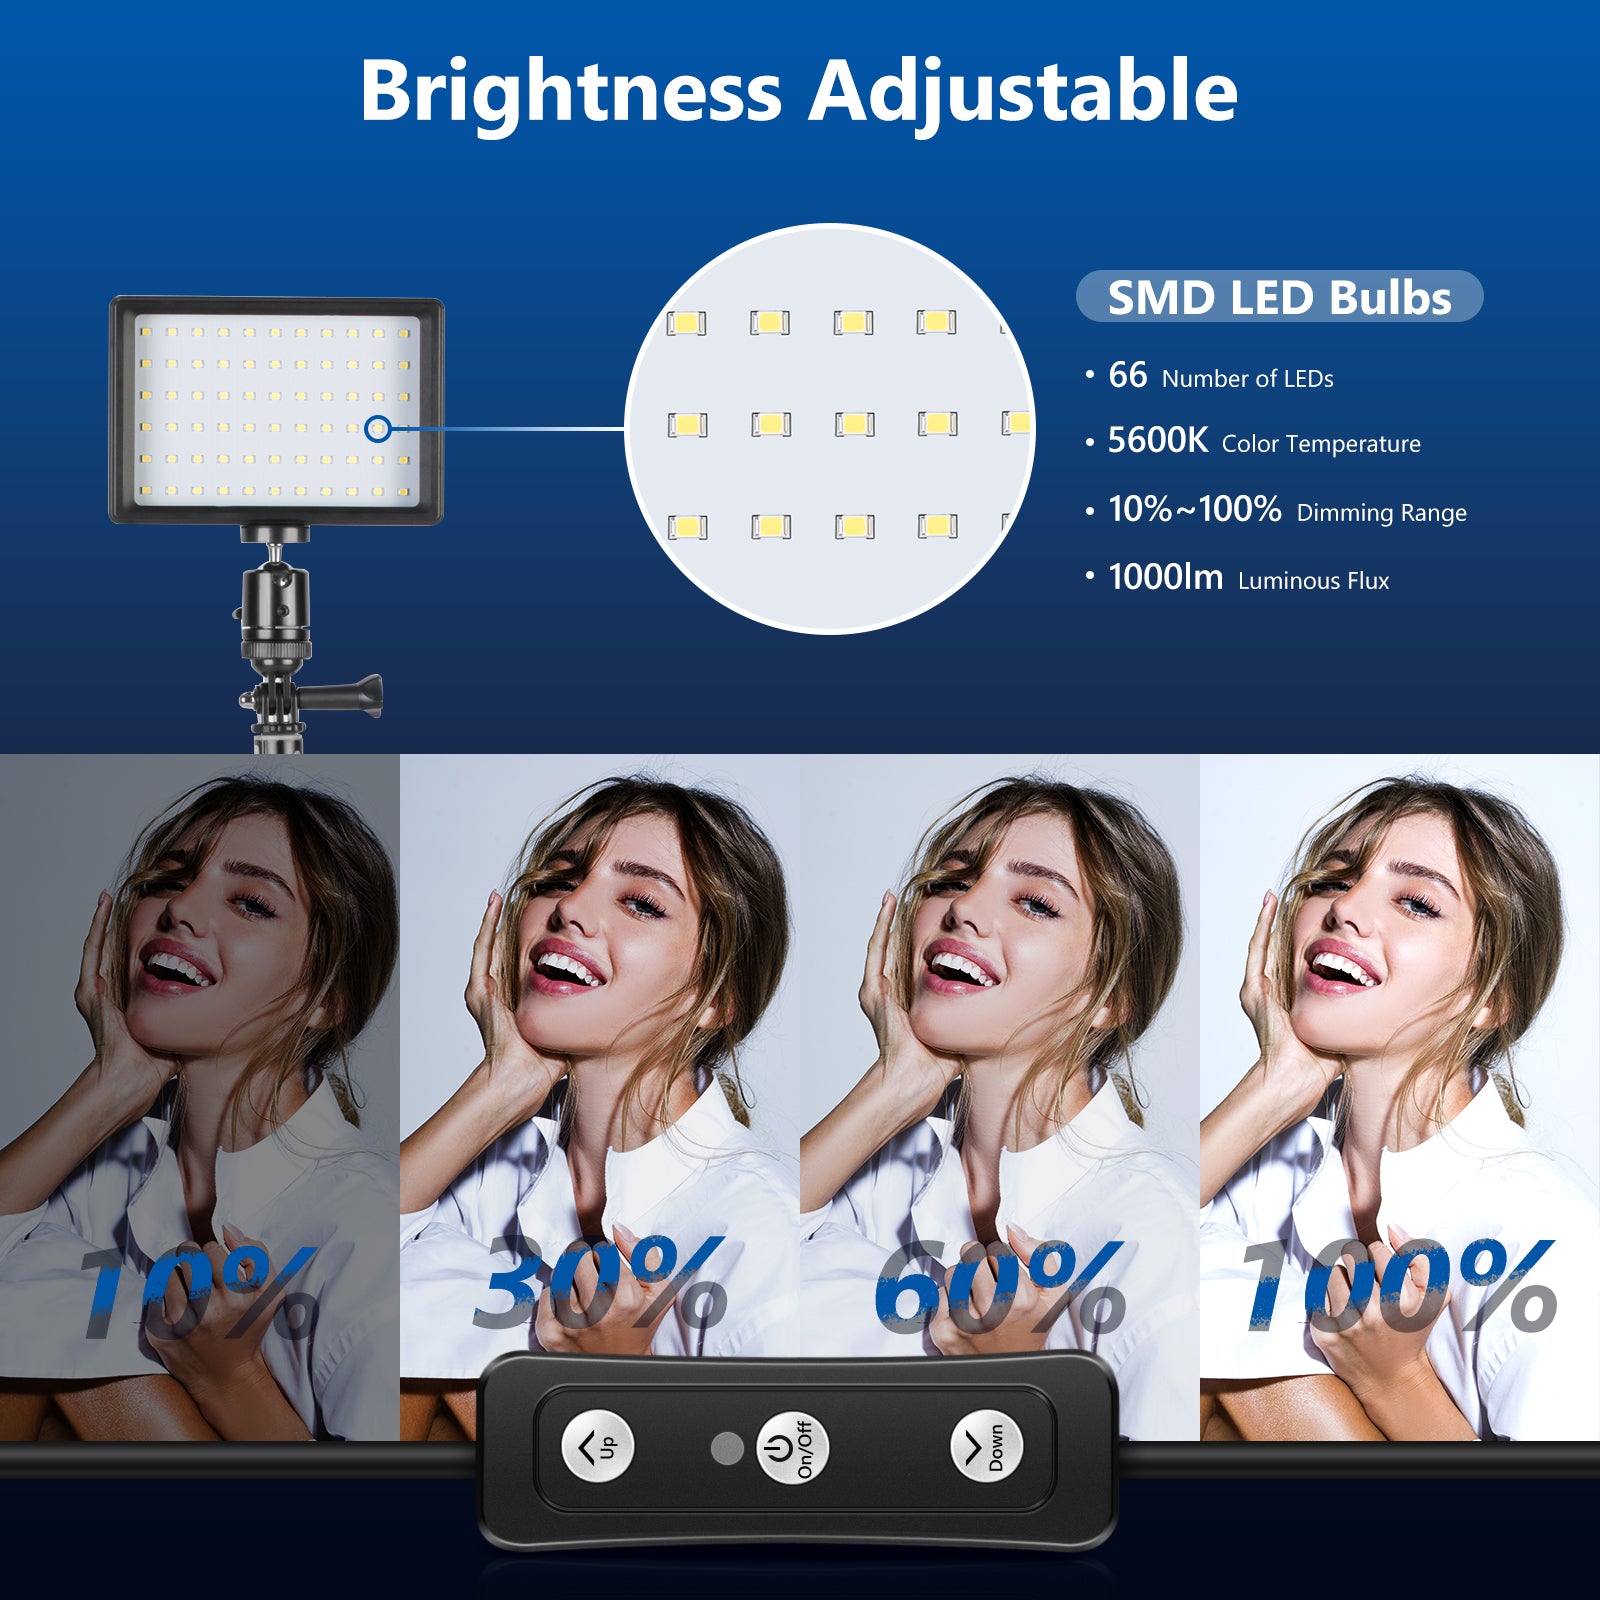 Neewer ZC-10S 2 Pack Dimmable LED Lights For Live Shows